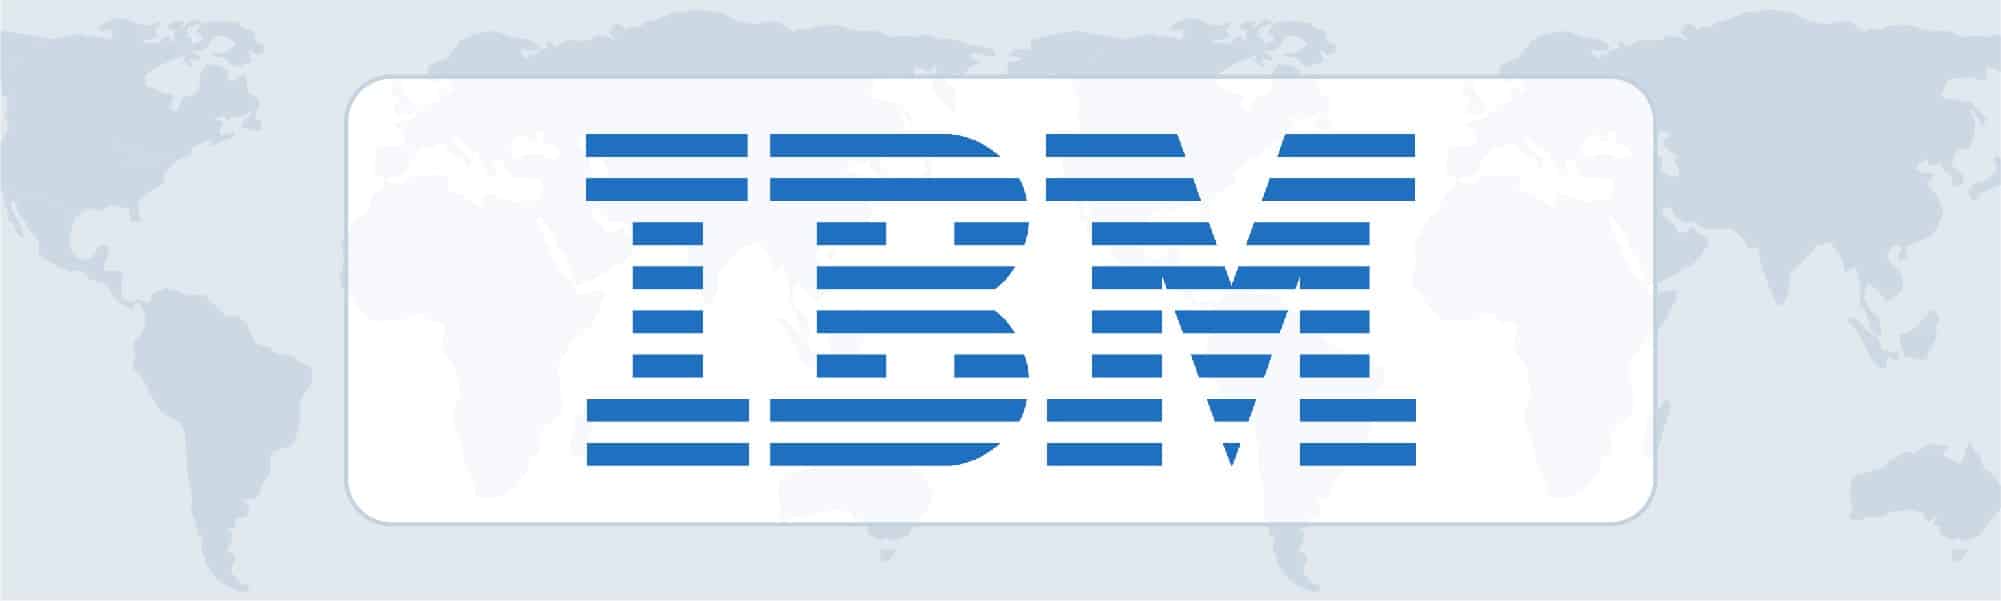 IBM as the Best Company in Data Science and Big Data Analytics in the USA